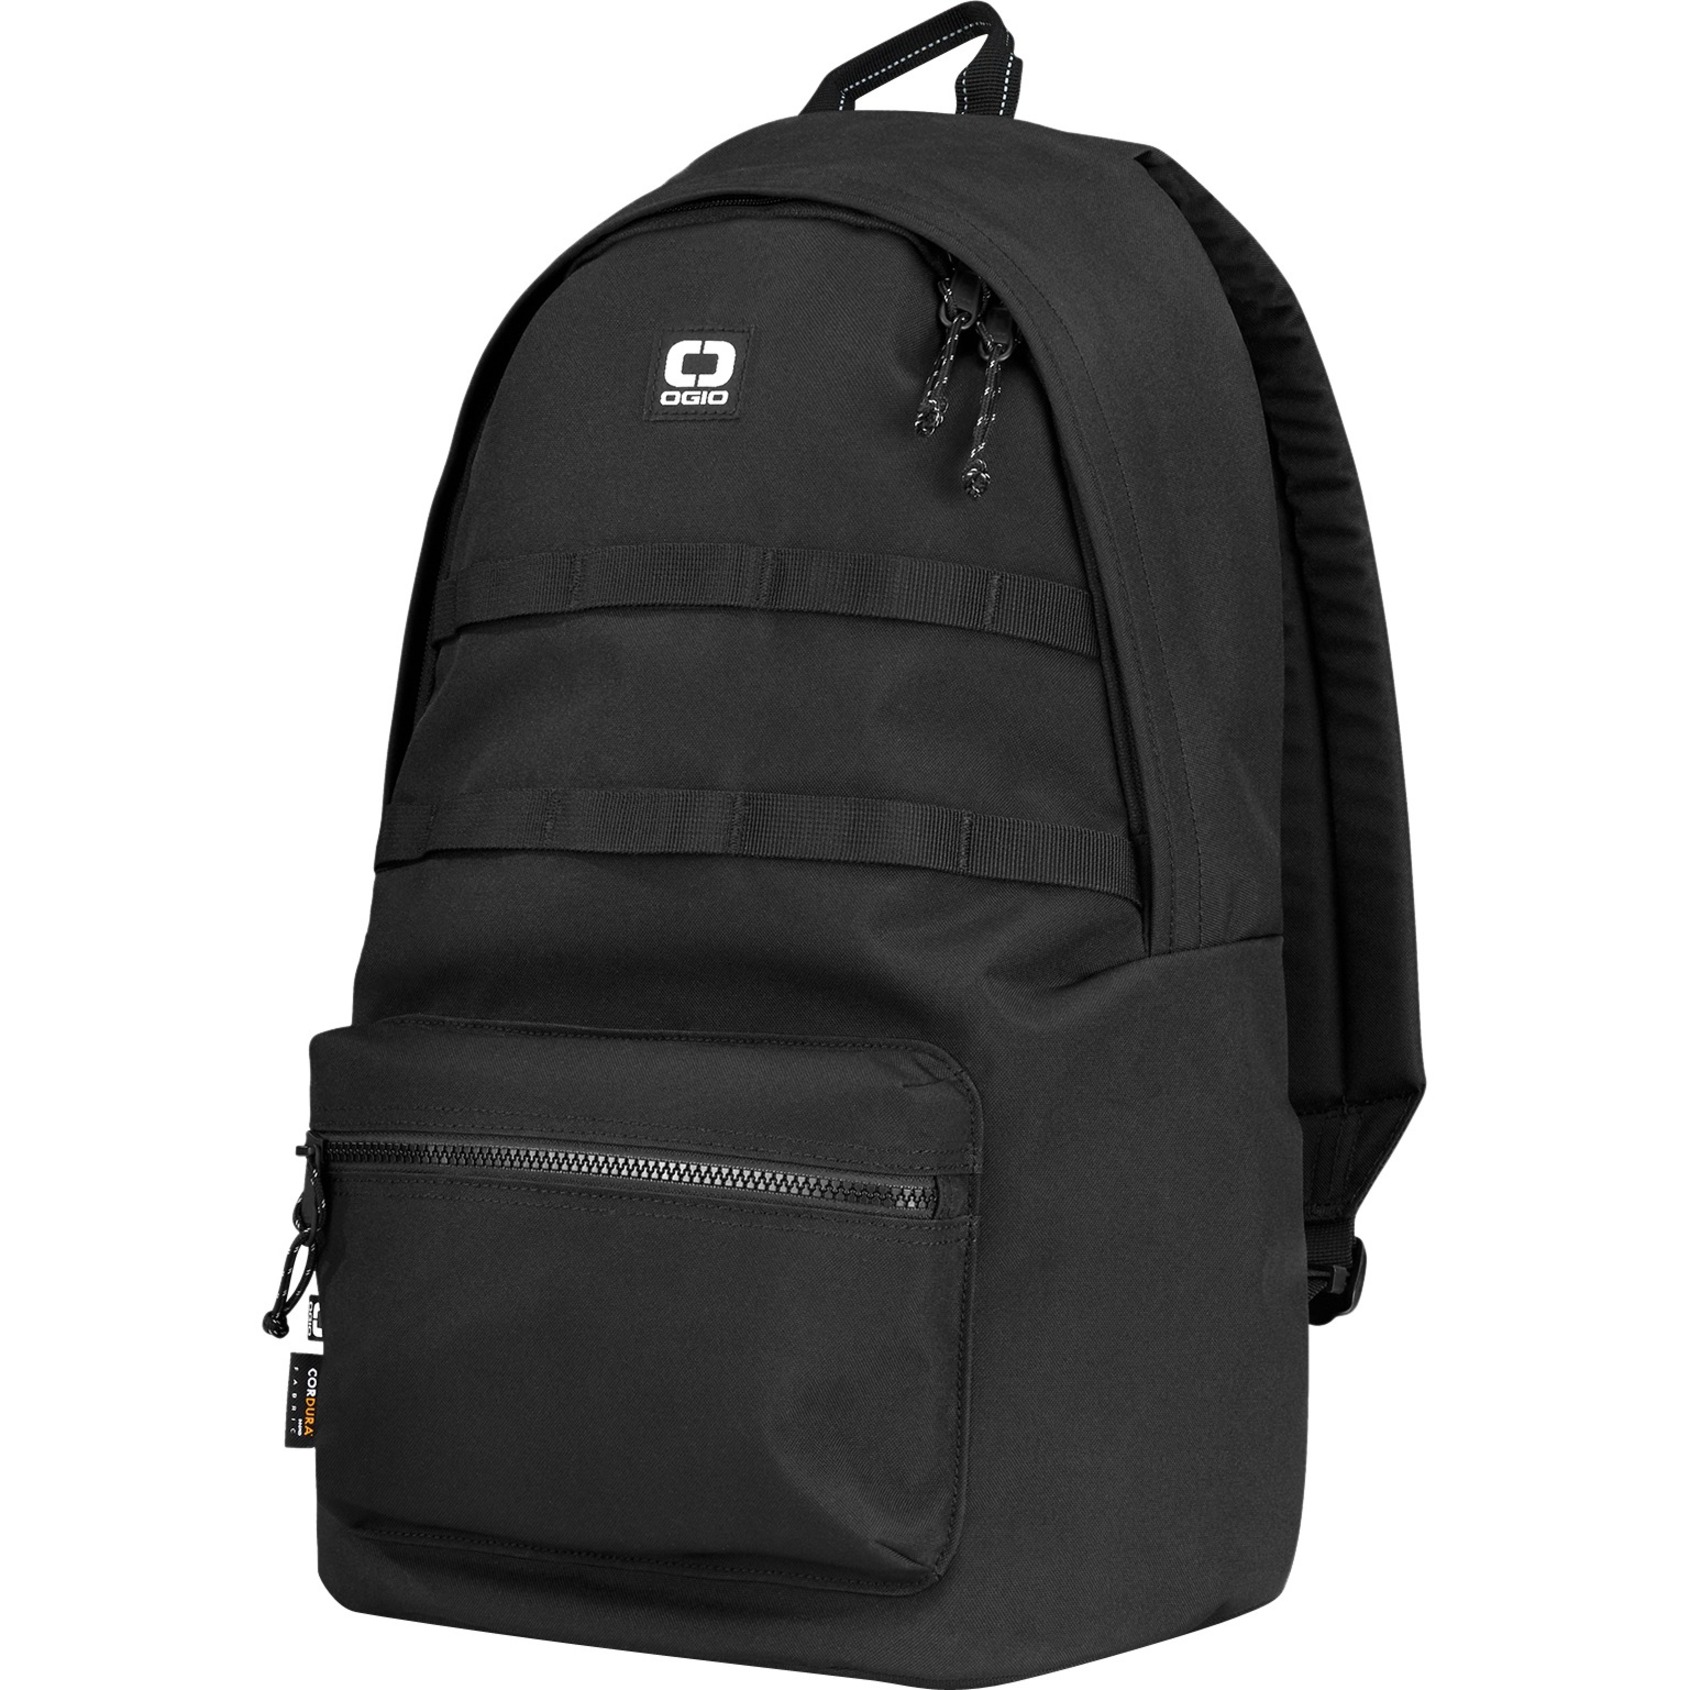 Ogio ALPHA Convoy 120 Carrying Case (Backpack) for 15" Notebook, Black - image 3 of 6